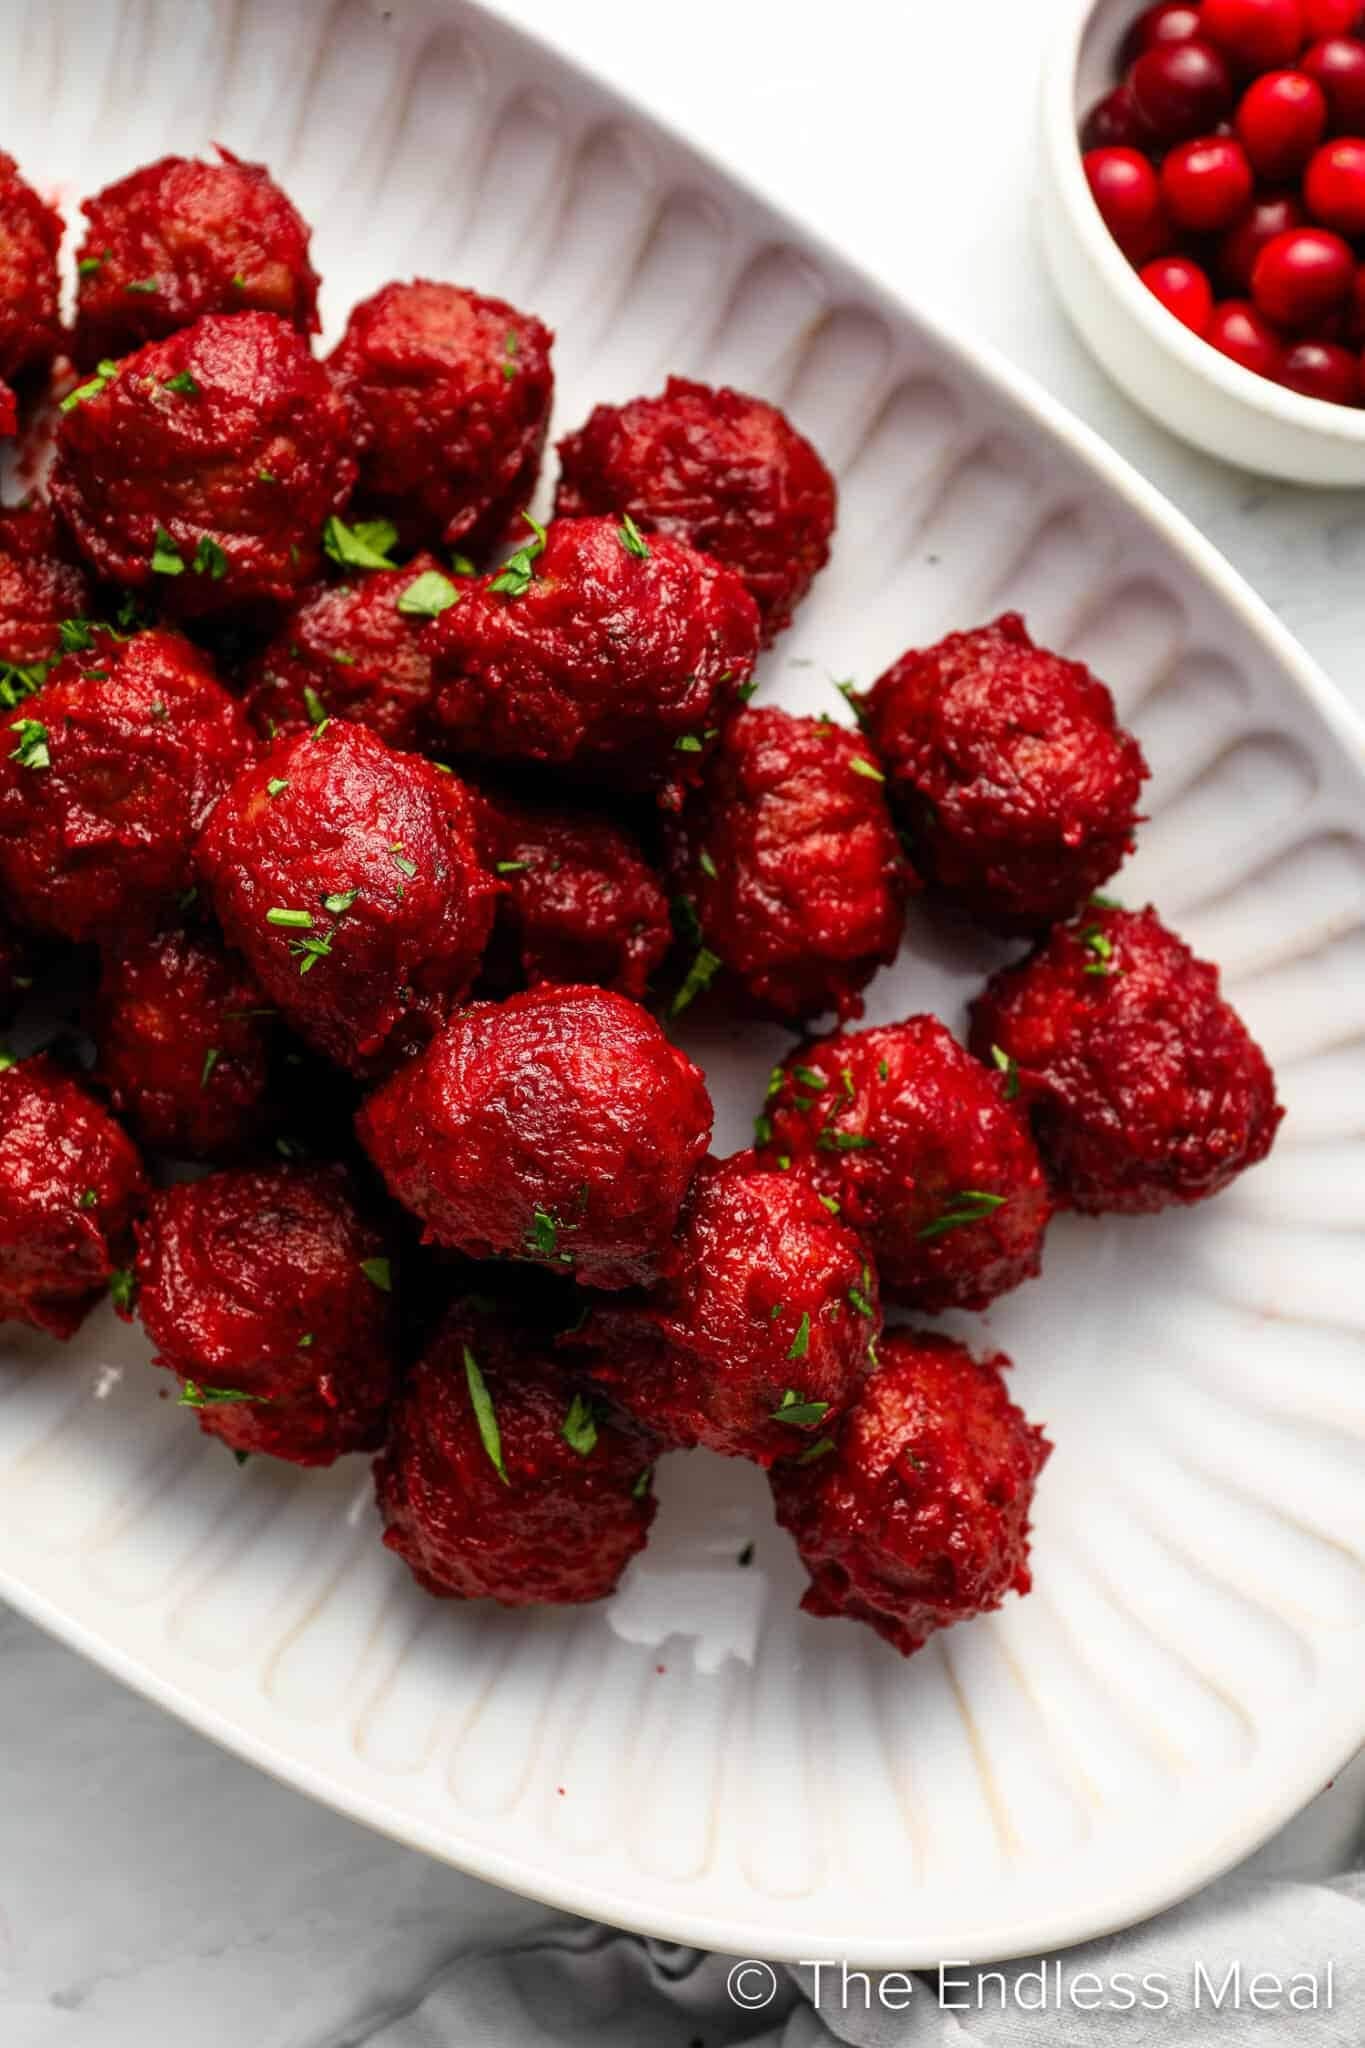 Bunch of bright red color meatballs on white plate.